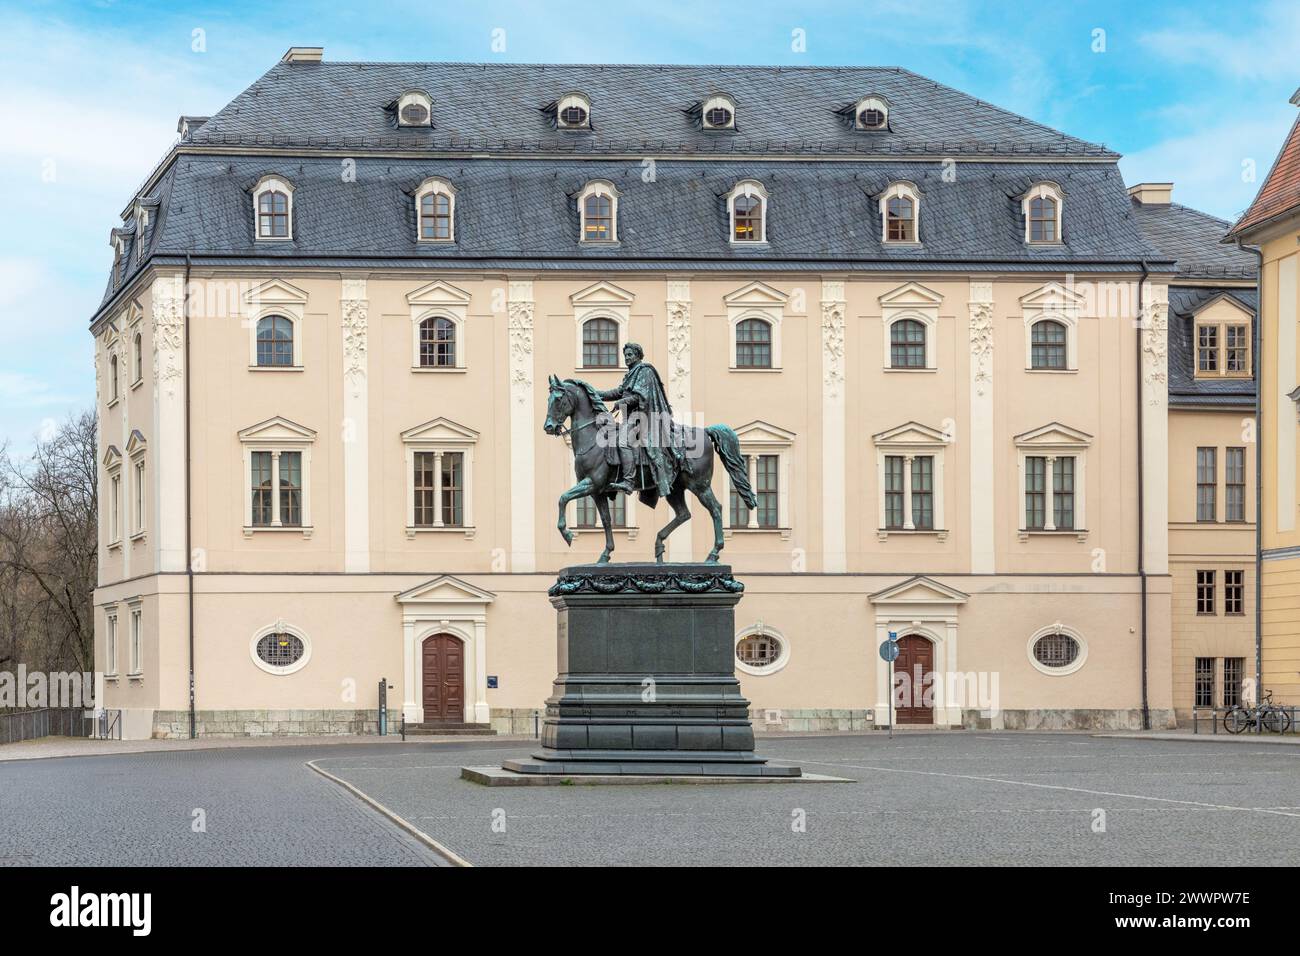 Place of Democracy in city of Weimar in Germany. Equestrian sculpture of Carl August - Duke of Saxe-Weimar-Eisenach Stock Photo